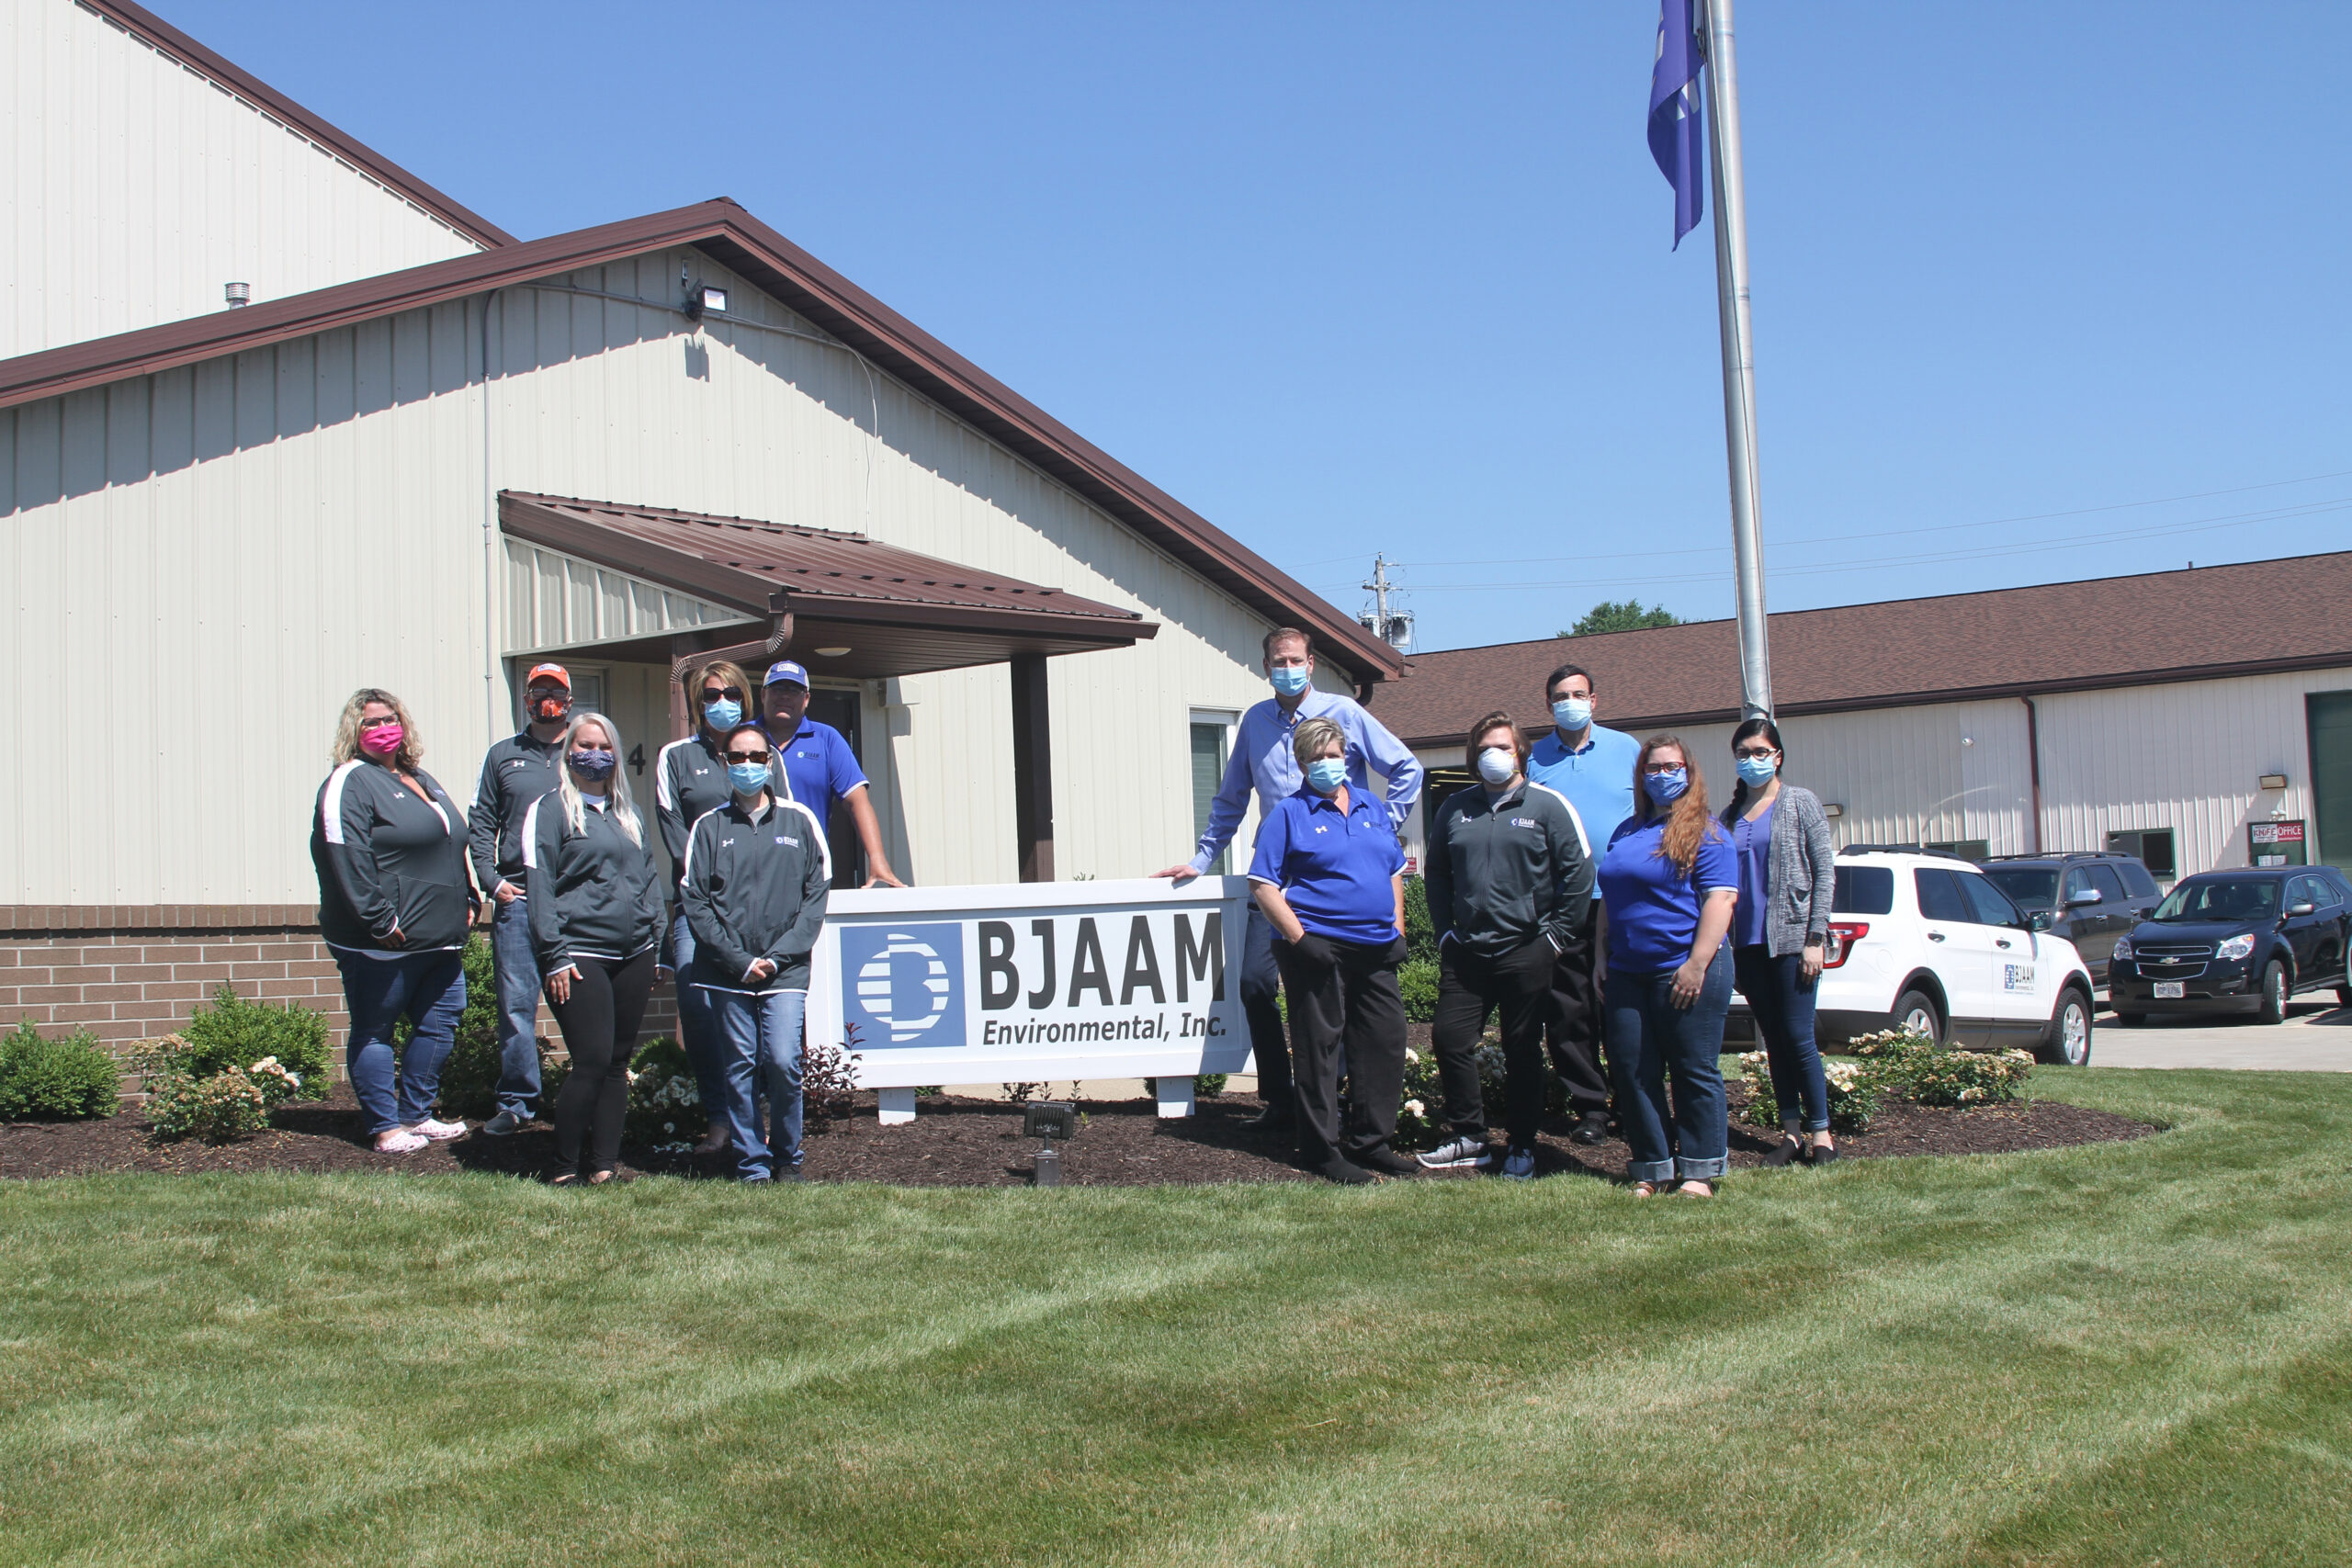 BJAAM Finance Team standing outside the corporate headquarters